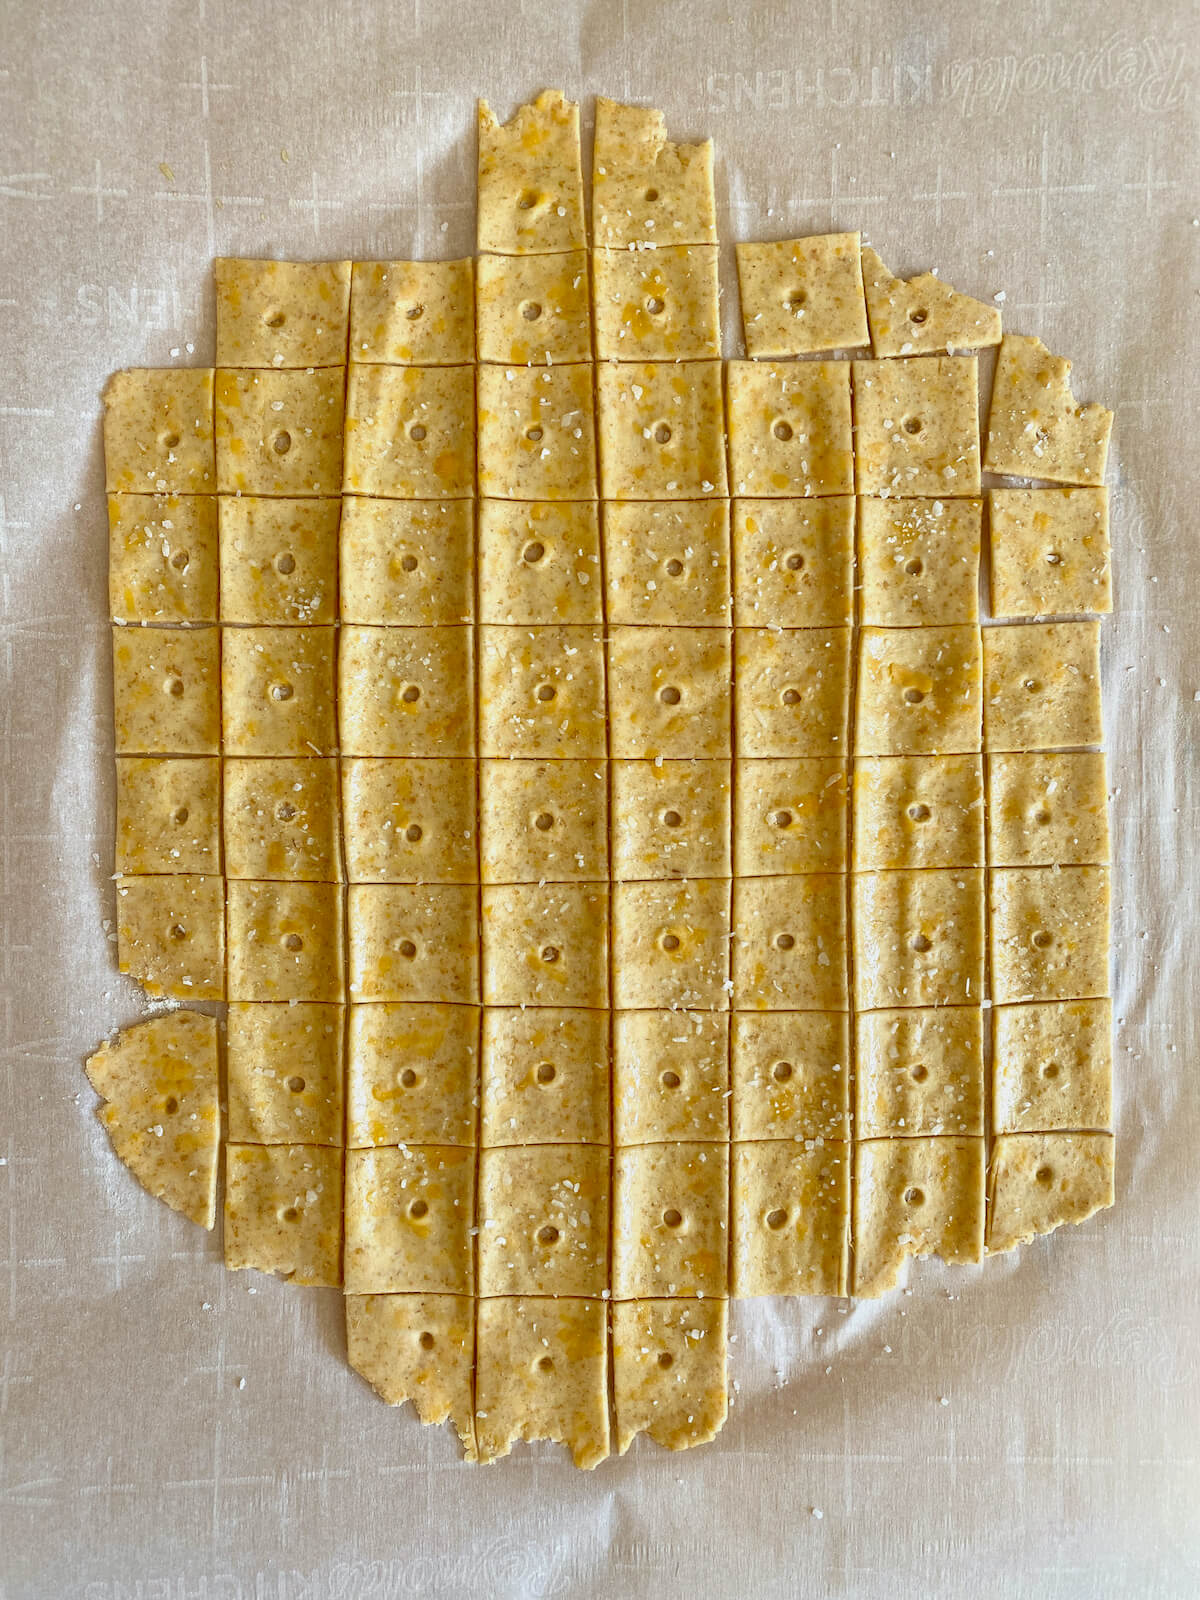 Sourdough discard cheese crackers cut into squares with a hole poked in the middle of each.